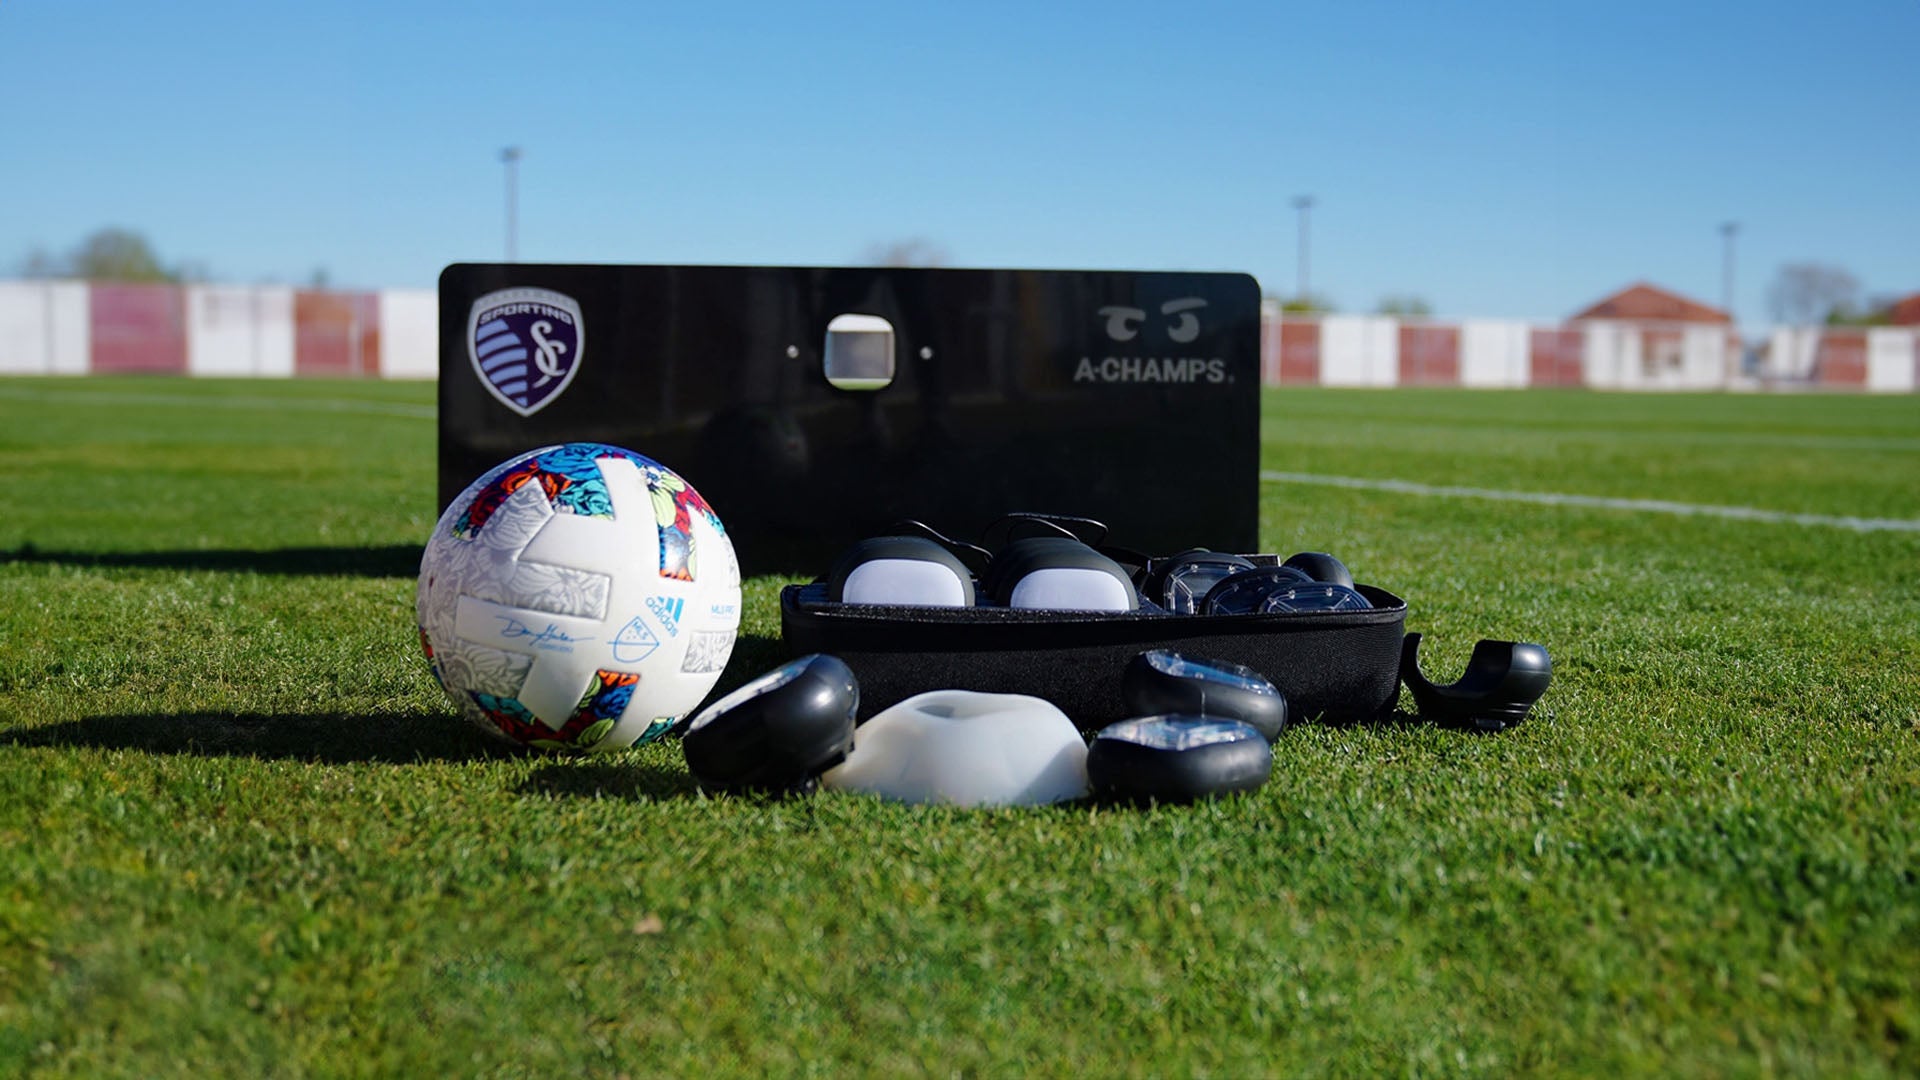 The best soccer training equipment that will make you an amazing player